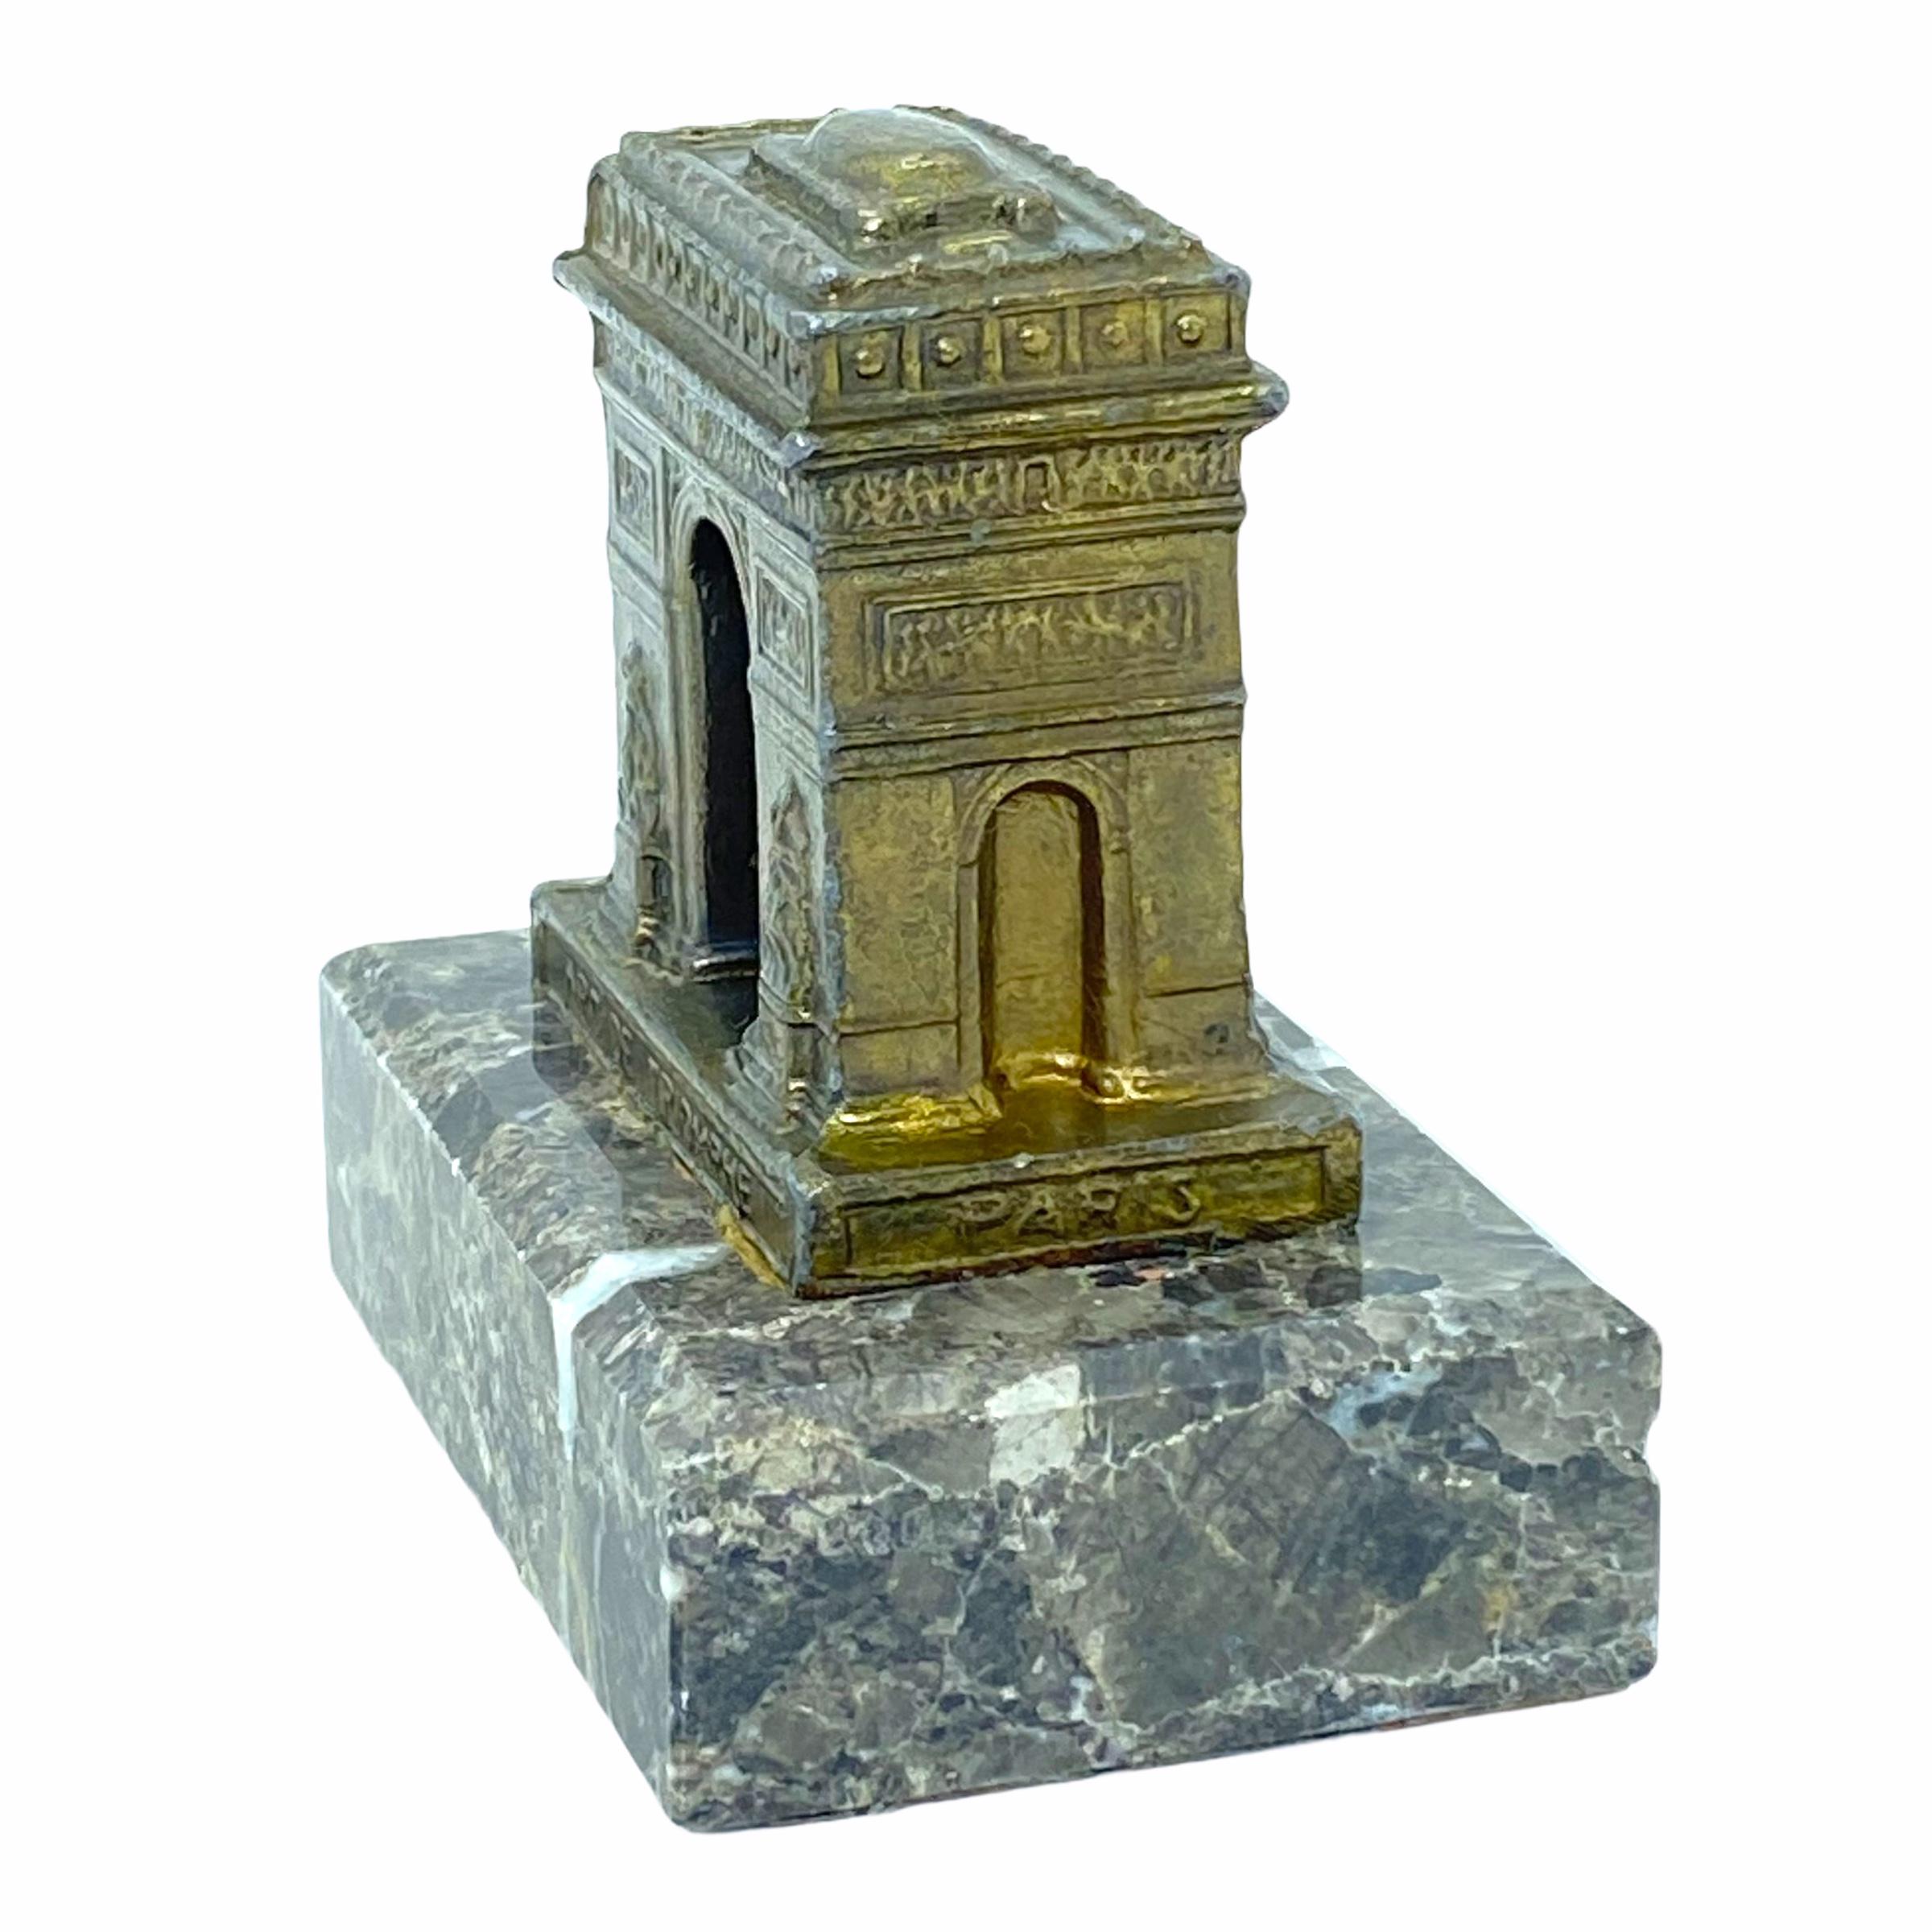 A decorative Arc de Triomphe Paris souvenir building sculpture. Some wear with a nice patina, but this is old-age. Made of metal and a marble base. This item was bought as a souvenir in Paris, France and was made probably in the 1960s.